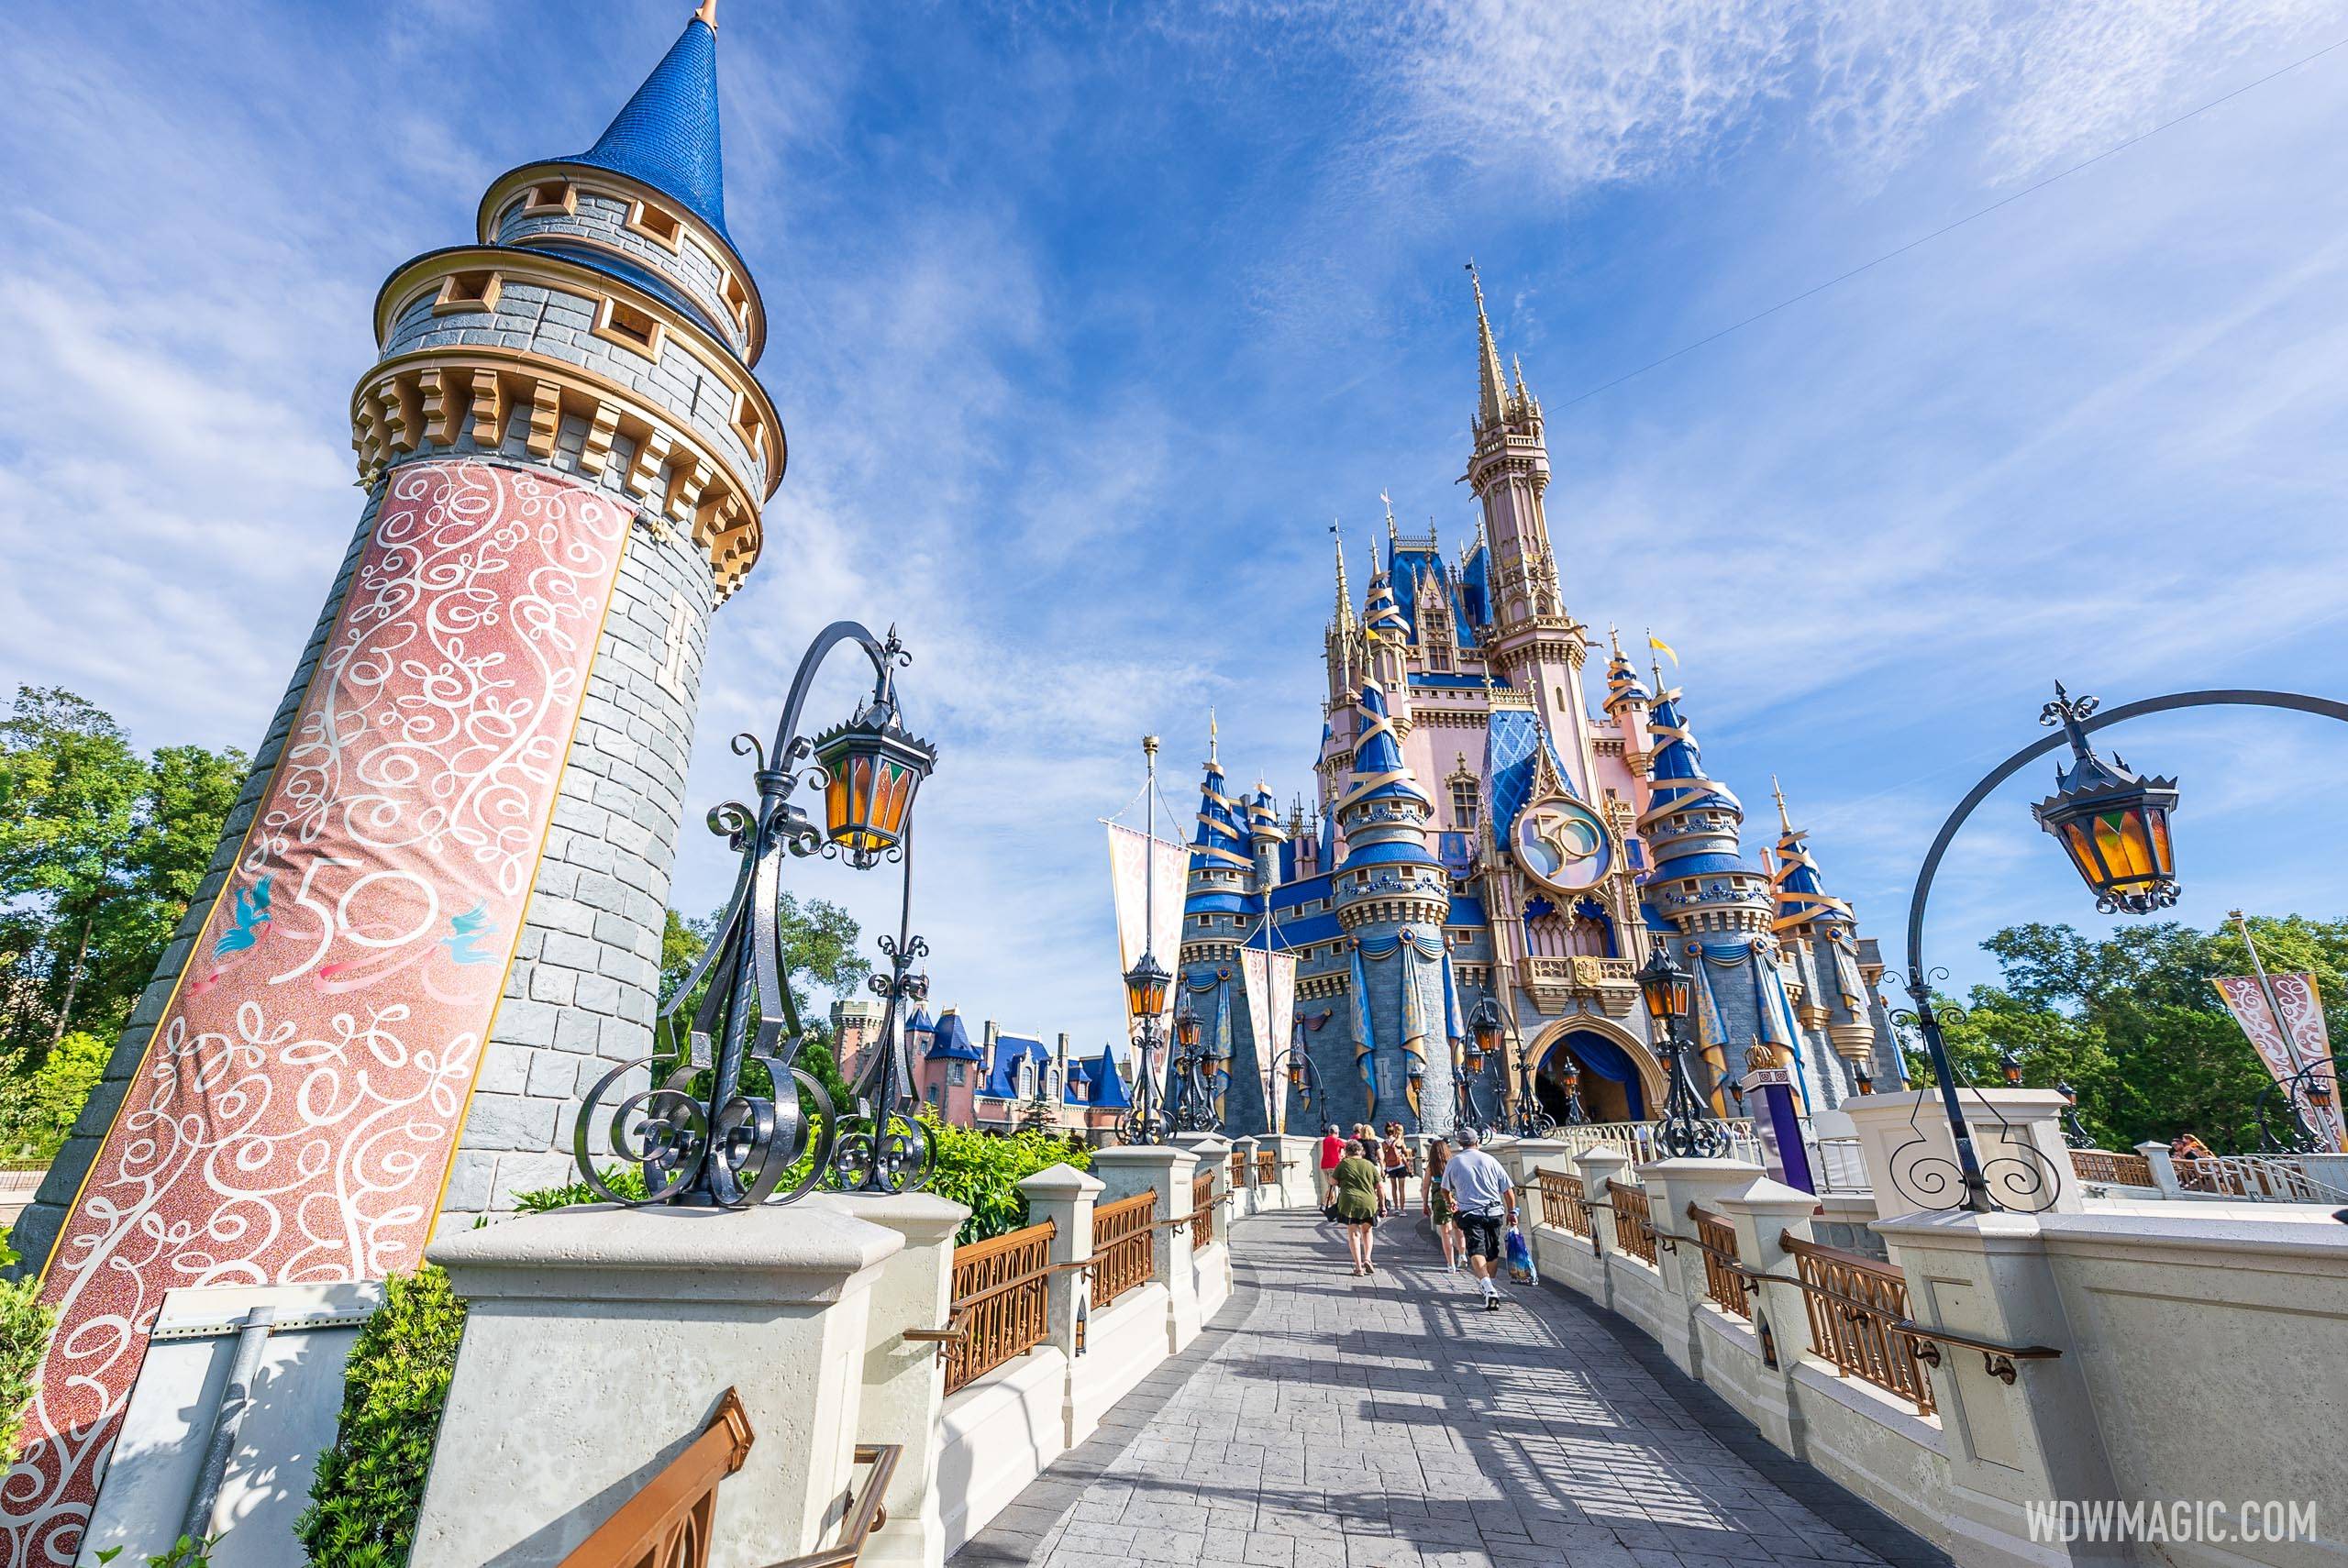 Walt Disney World will celebrate its 50th anniversary from October